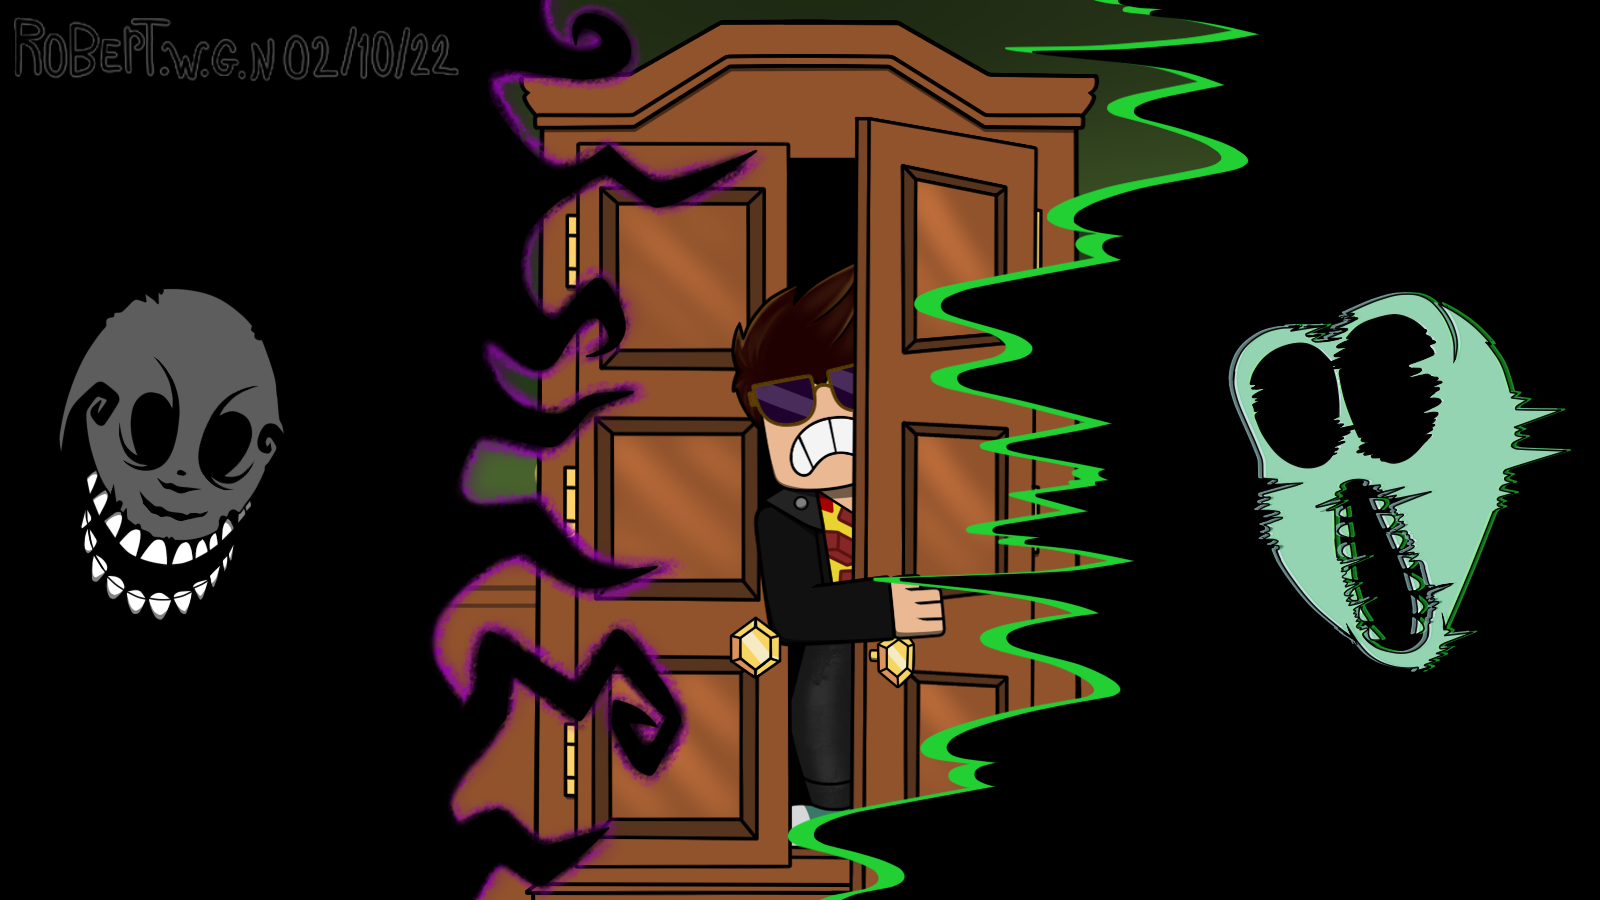 Roblox doors monsters by PaintrBrush on DeviantArt